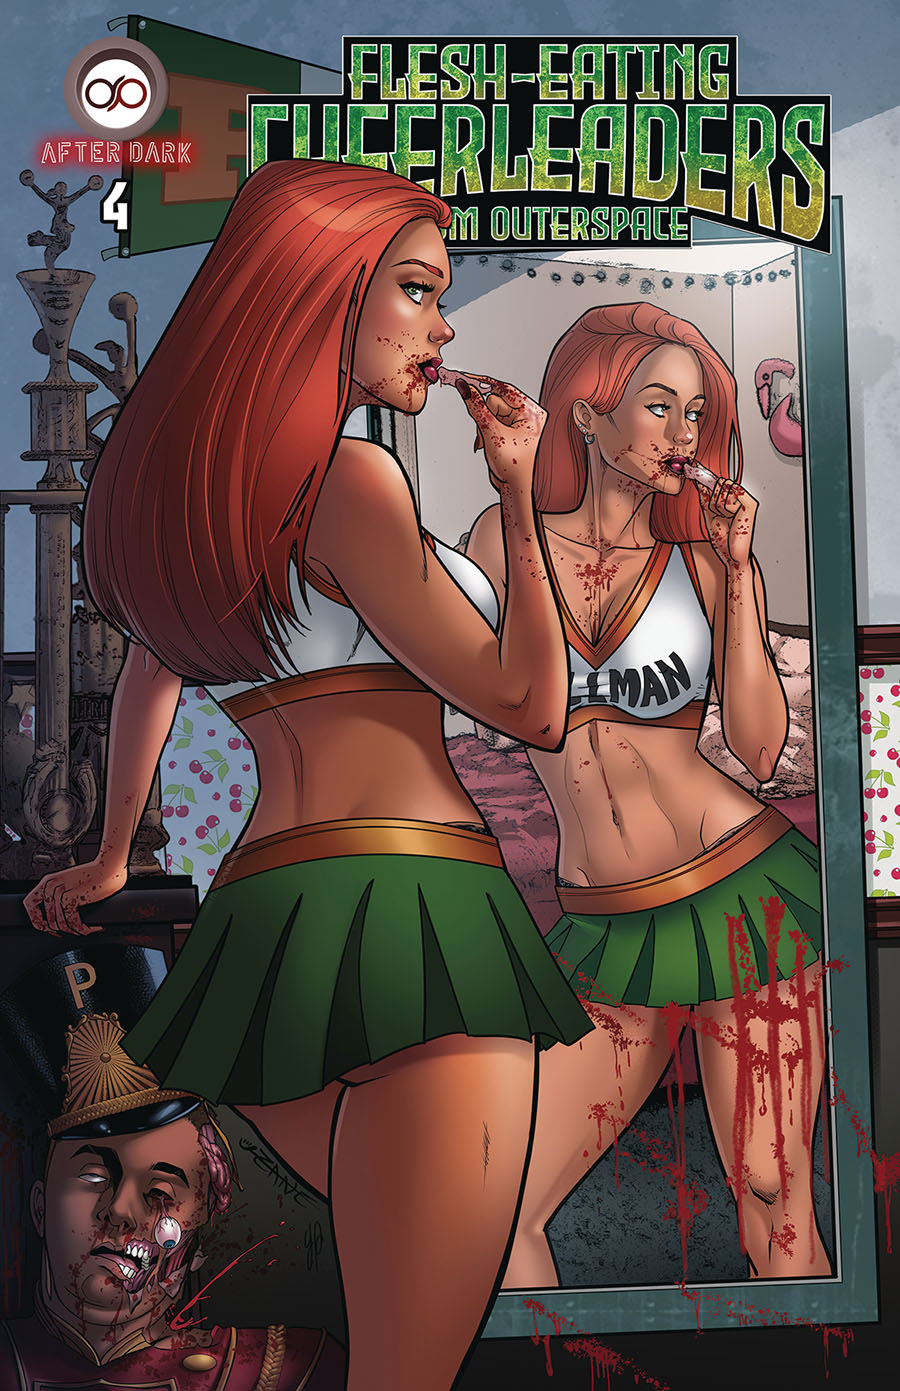 Flesh-Eating Cheerleaders From Outer Space #4 Cover A Regular CB Zane Cover